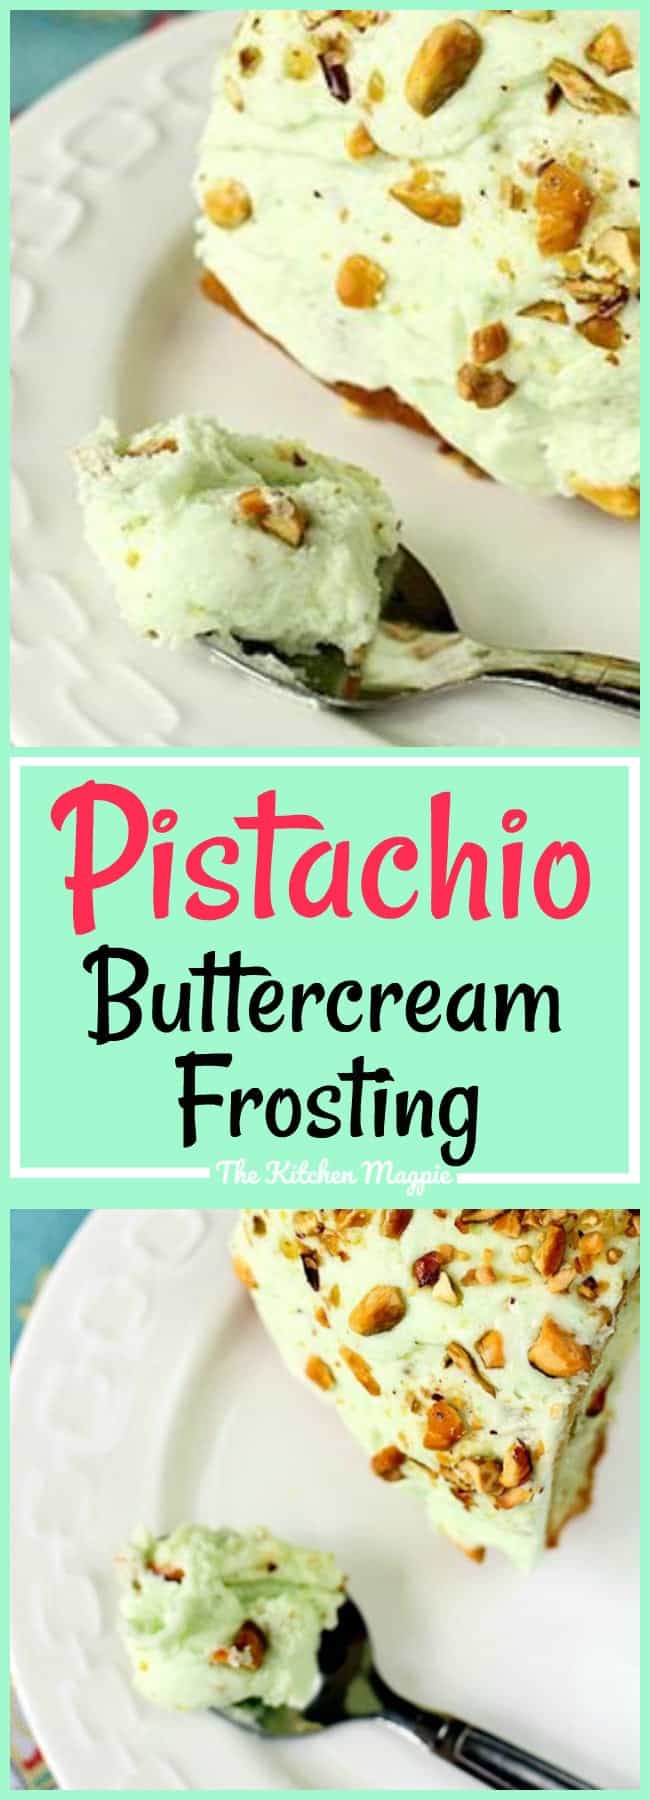 Pistachio Pudding Buttercream frosting, a gorgeous, melt in your mouth buttercream icing that's flavored with pistachio pudding. To.Die.For.